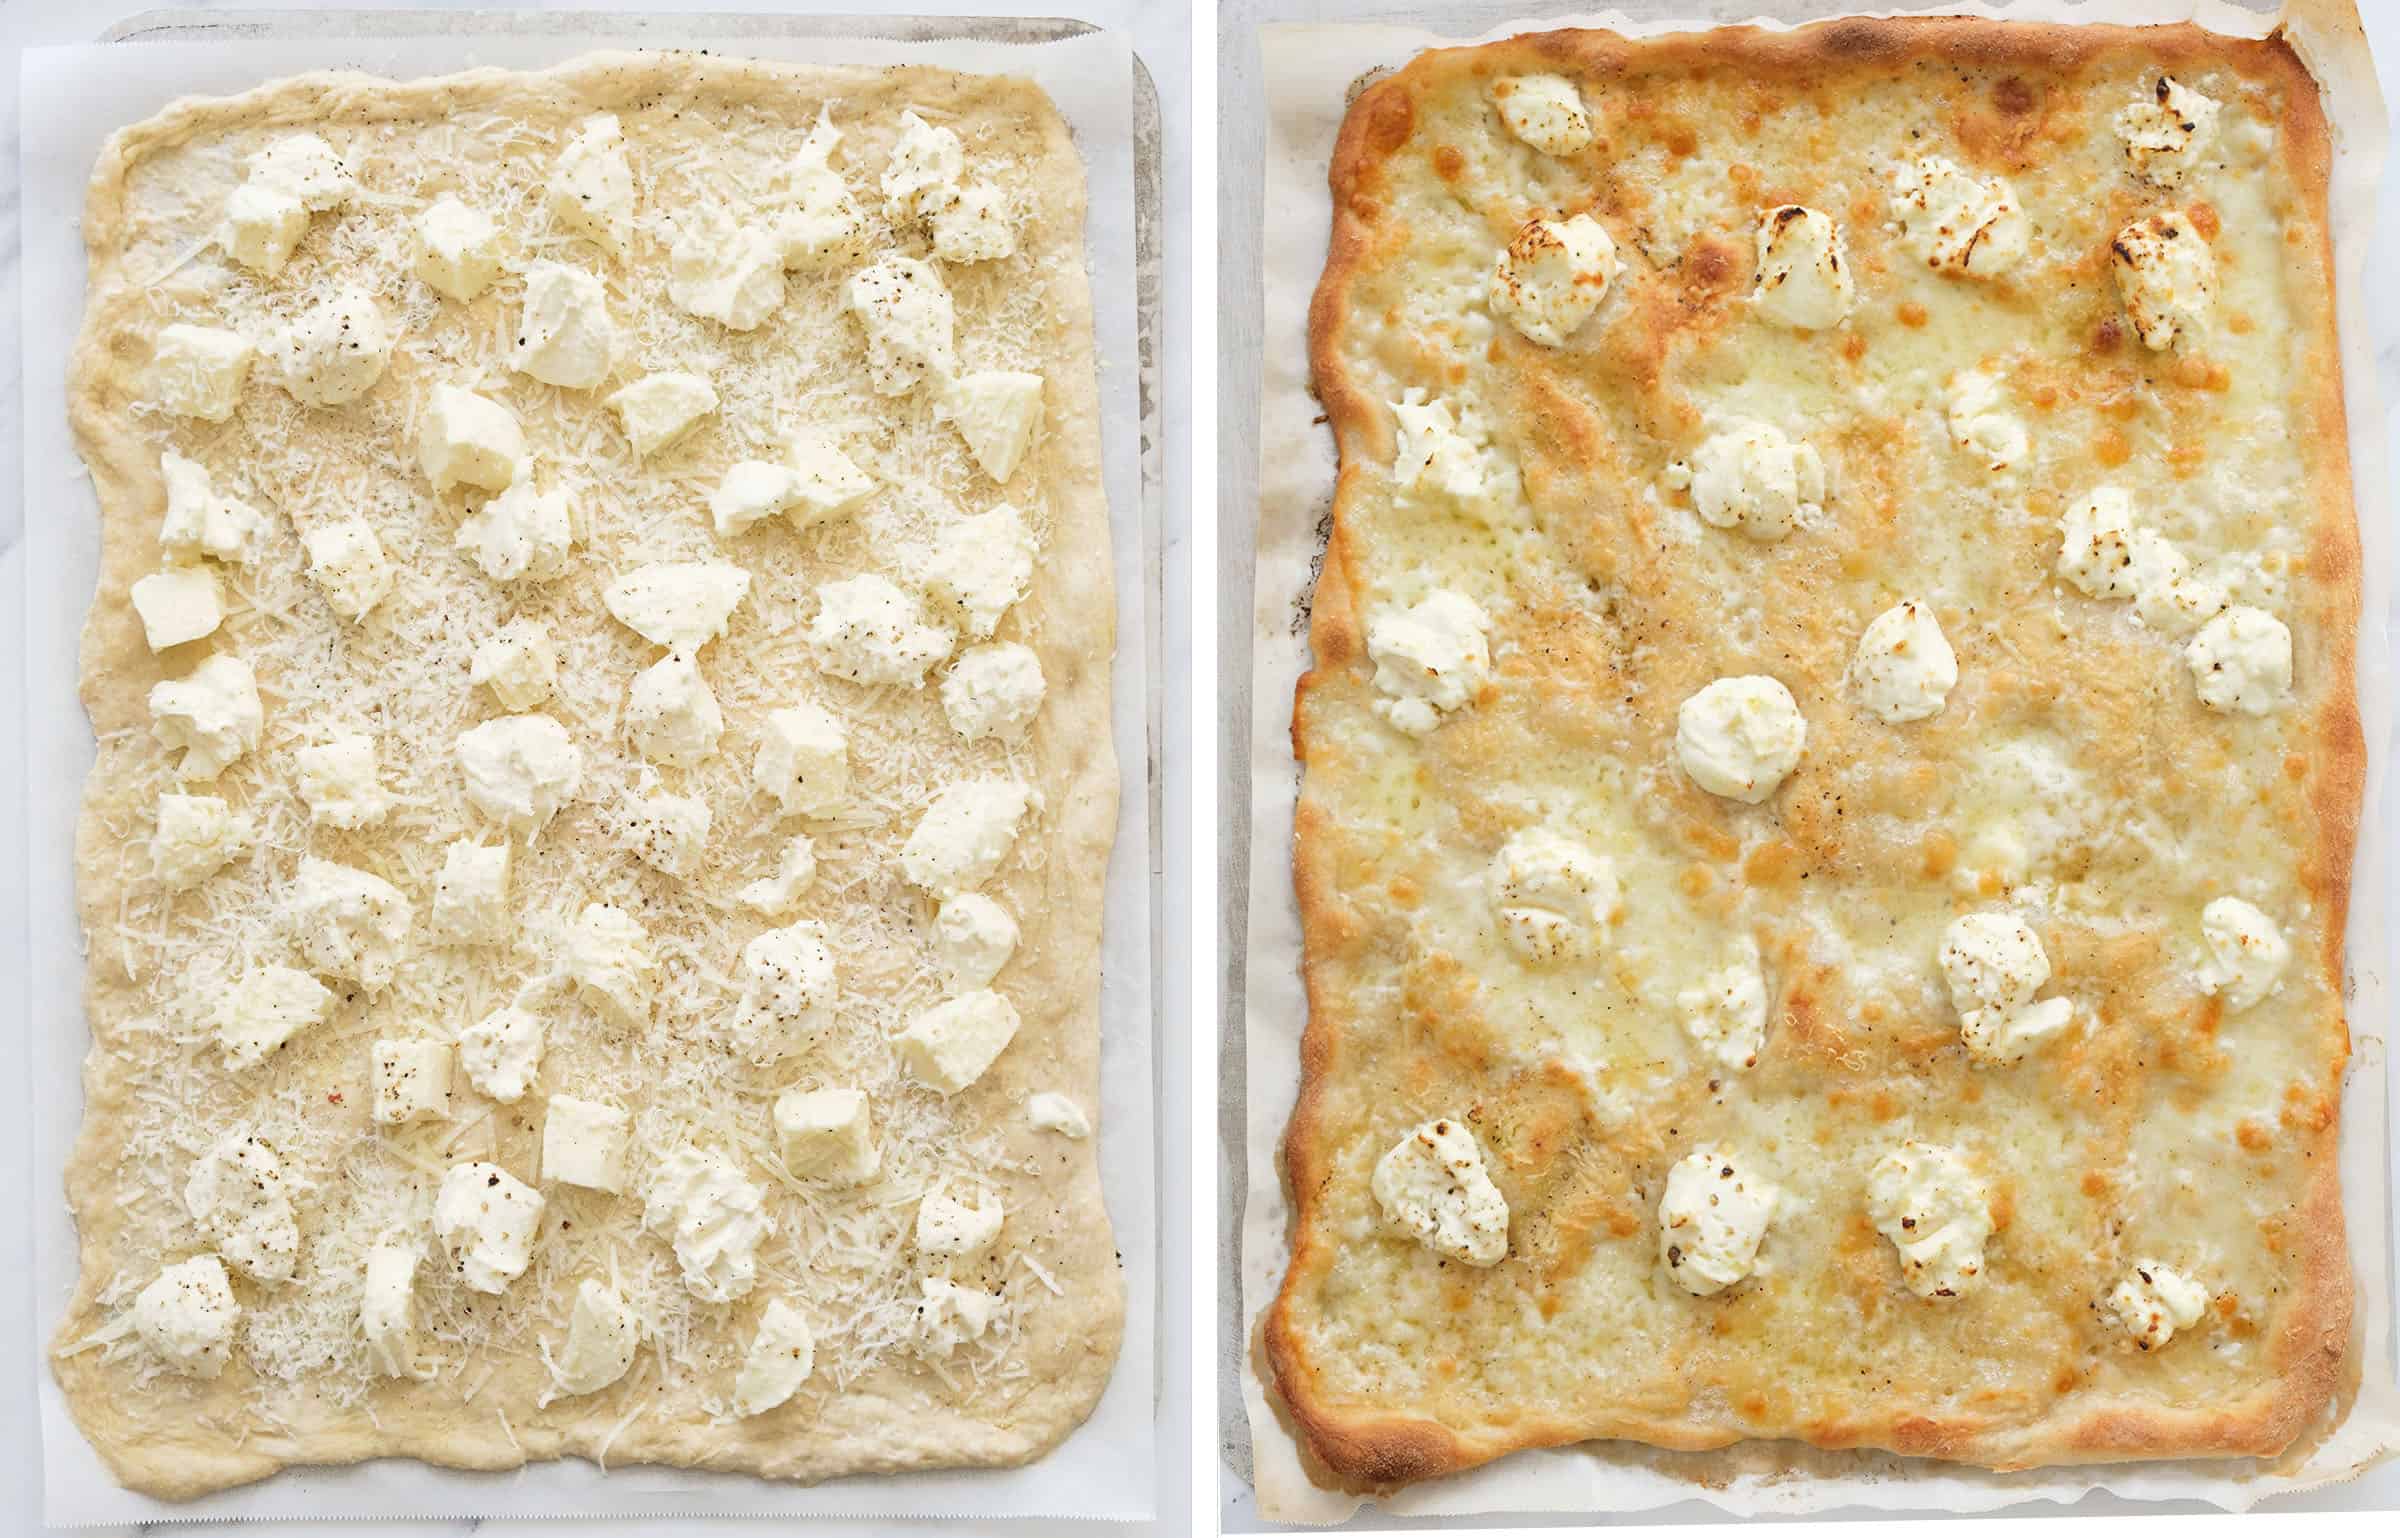 Top view of a rectangular cream cheese pizza before and after baking.